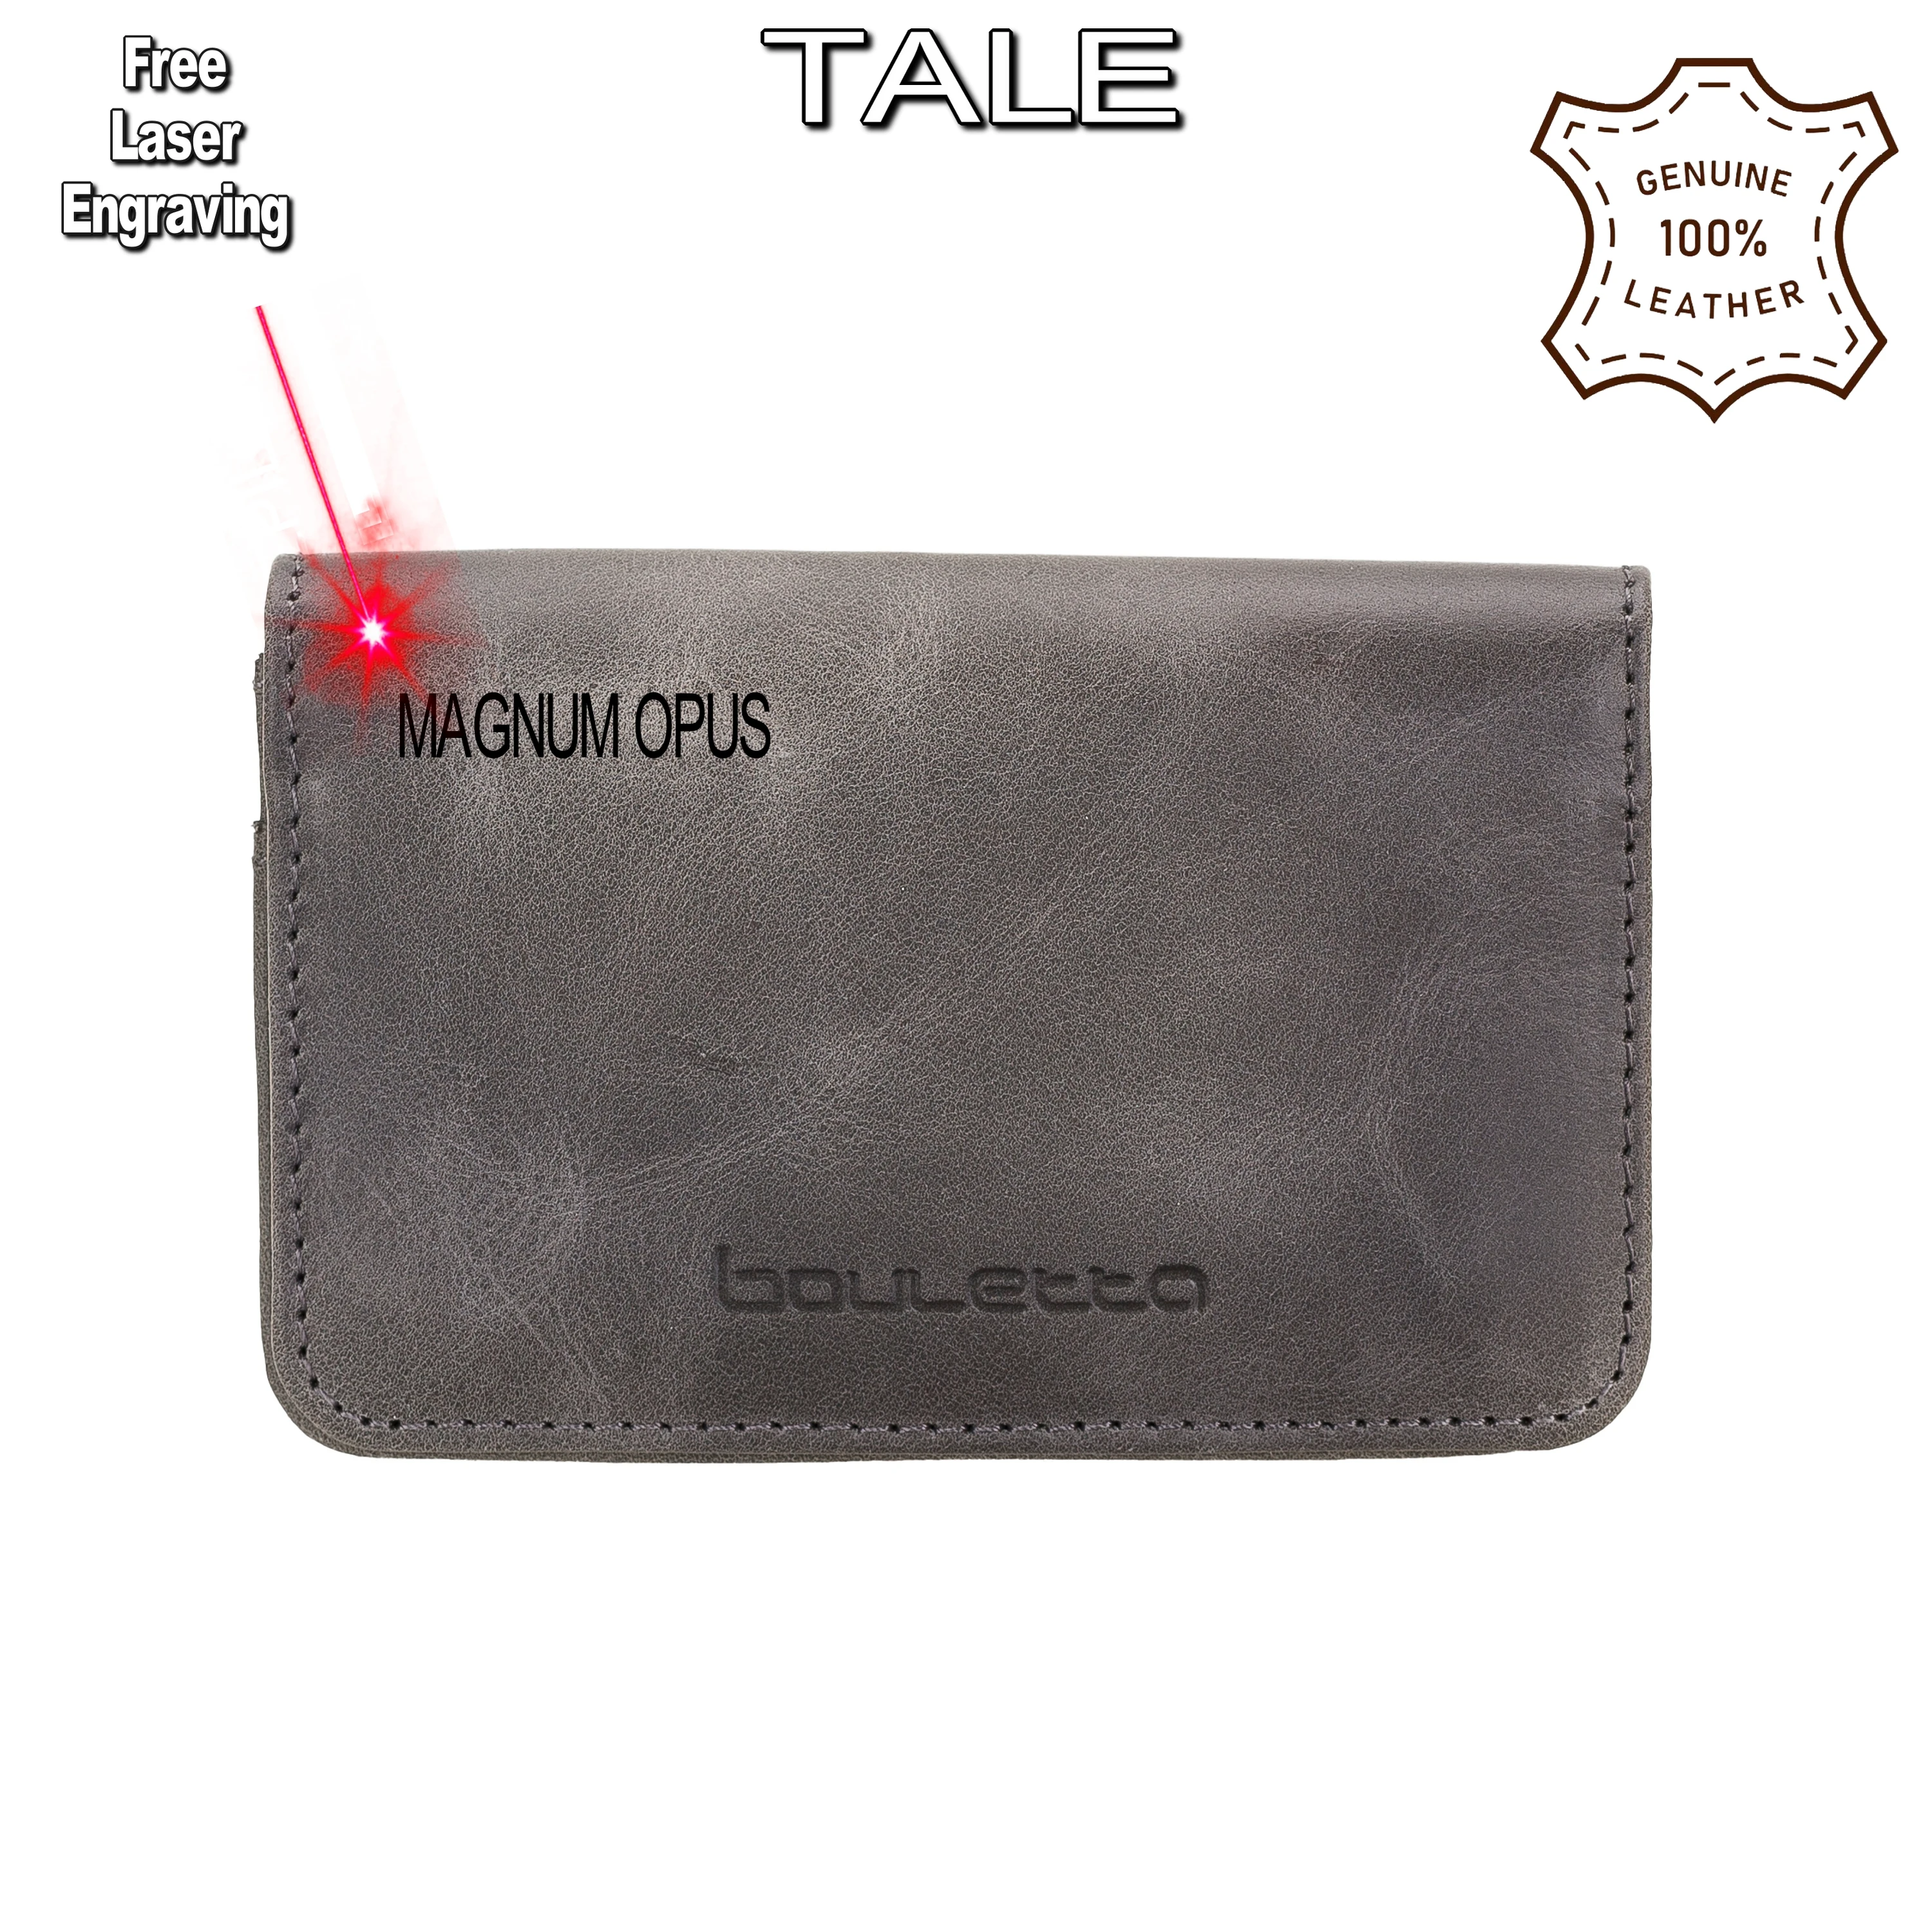 Handmade Genuine Leather Magnetic Closure Credit Card and ID Card Holder Elegant and Stylish Stores Up To 10 Cards Wallet